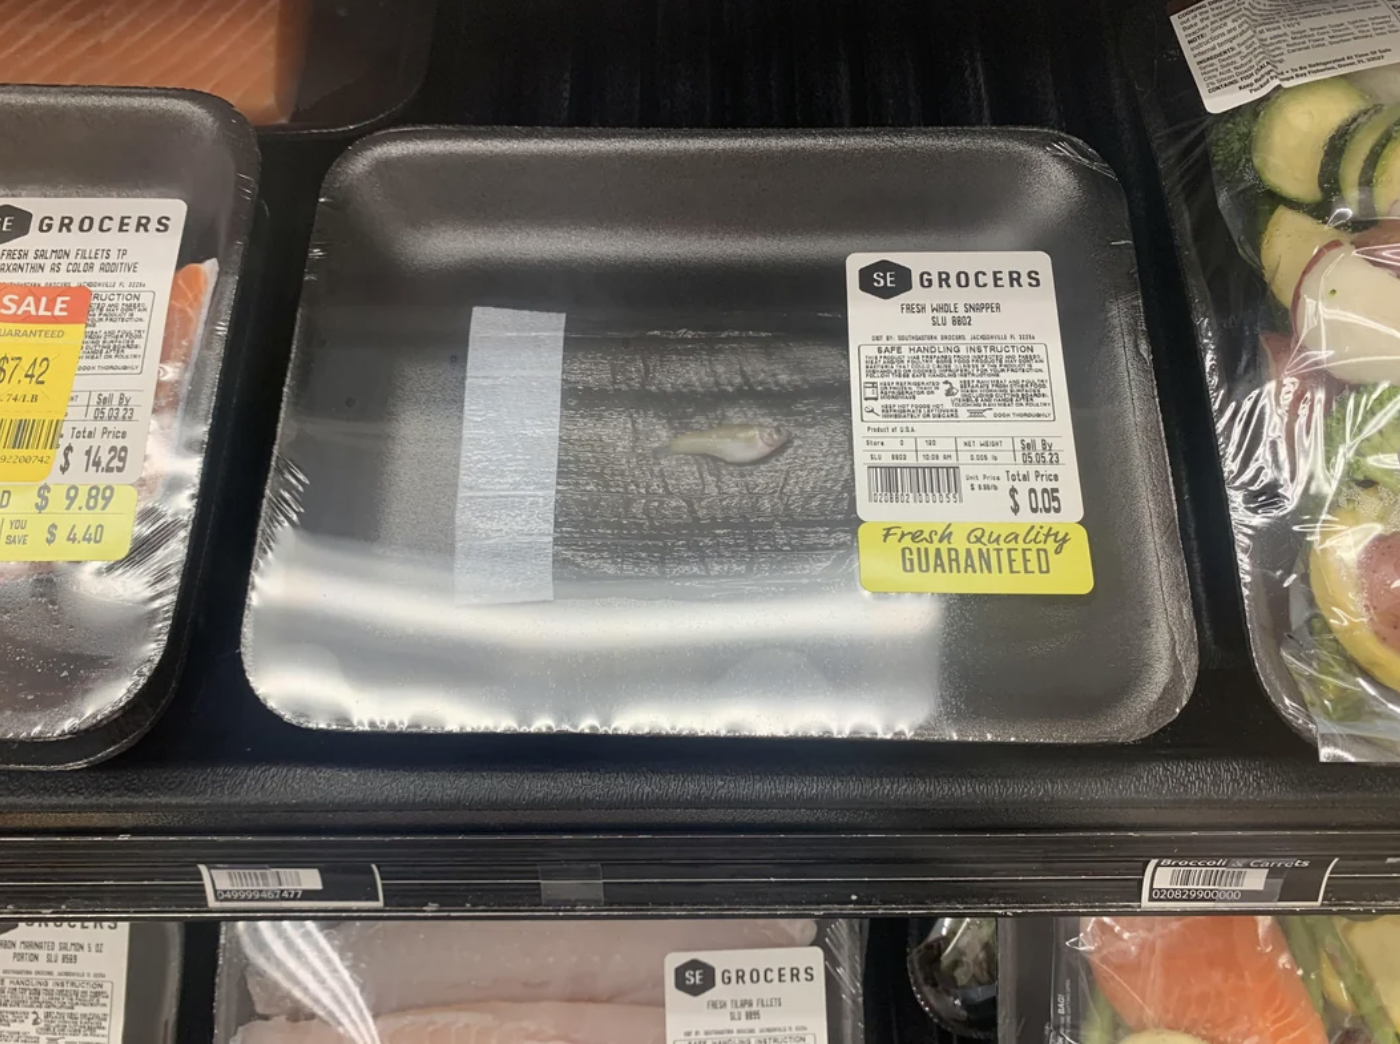 electronics - E Grocers Fresh Salmon Fun Montan A Cold Sale 57.42 Tatal Price S 14.29 $9.89 $4.40 20 Wote Se Grocers Publ Se Grocers Fresh Woll Shipper The Best M Talal Pric Fonteatter $ 0.05 Fresh Quality Guaranteed Pearrves